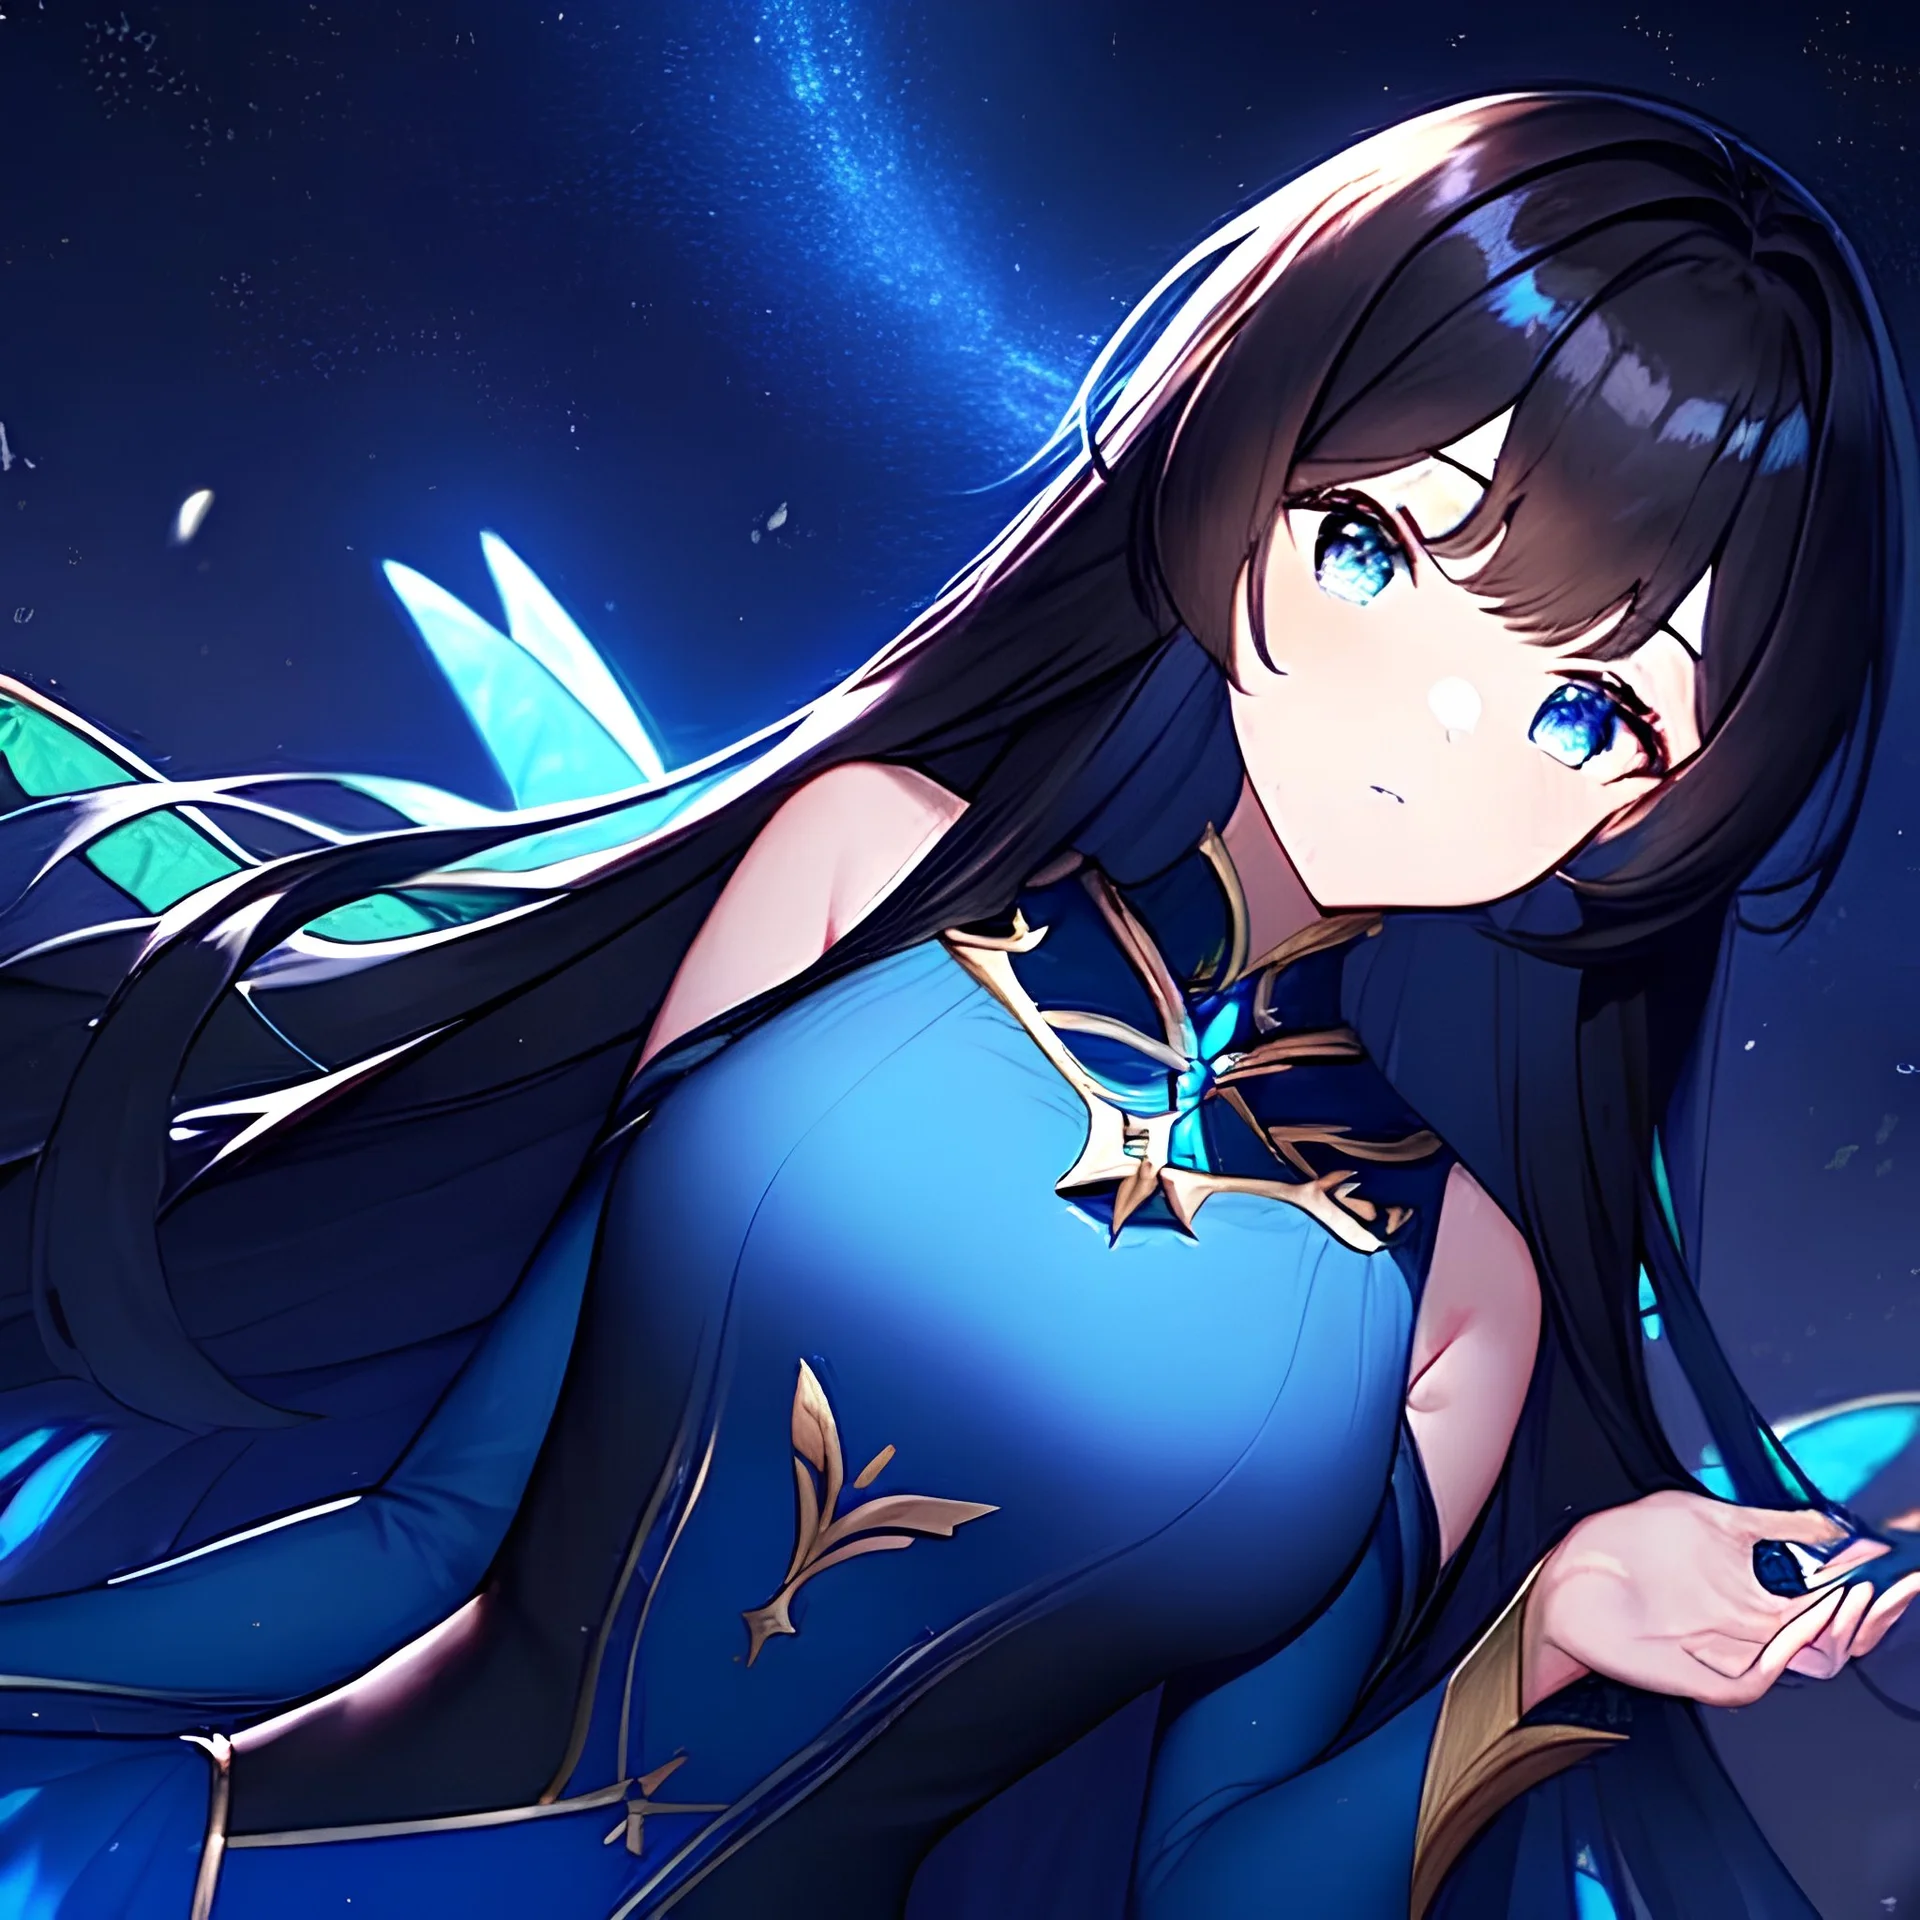 fairy elf girl with black straight hair and blue eyes surrounded by a starry night sky